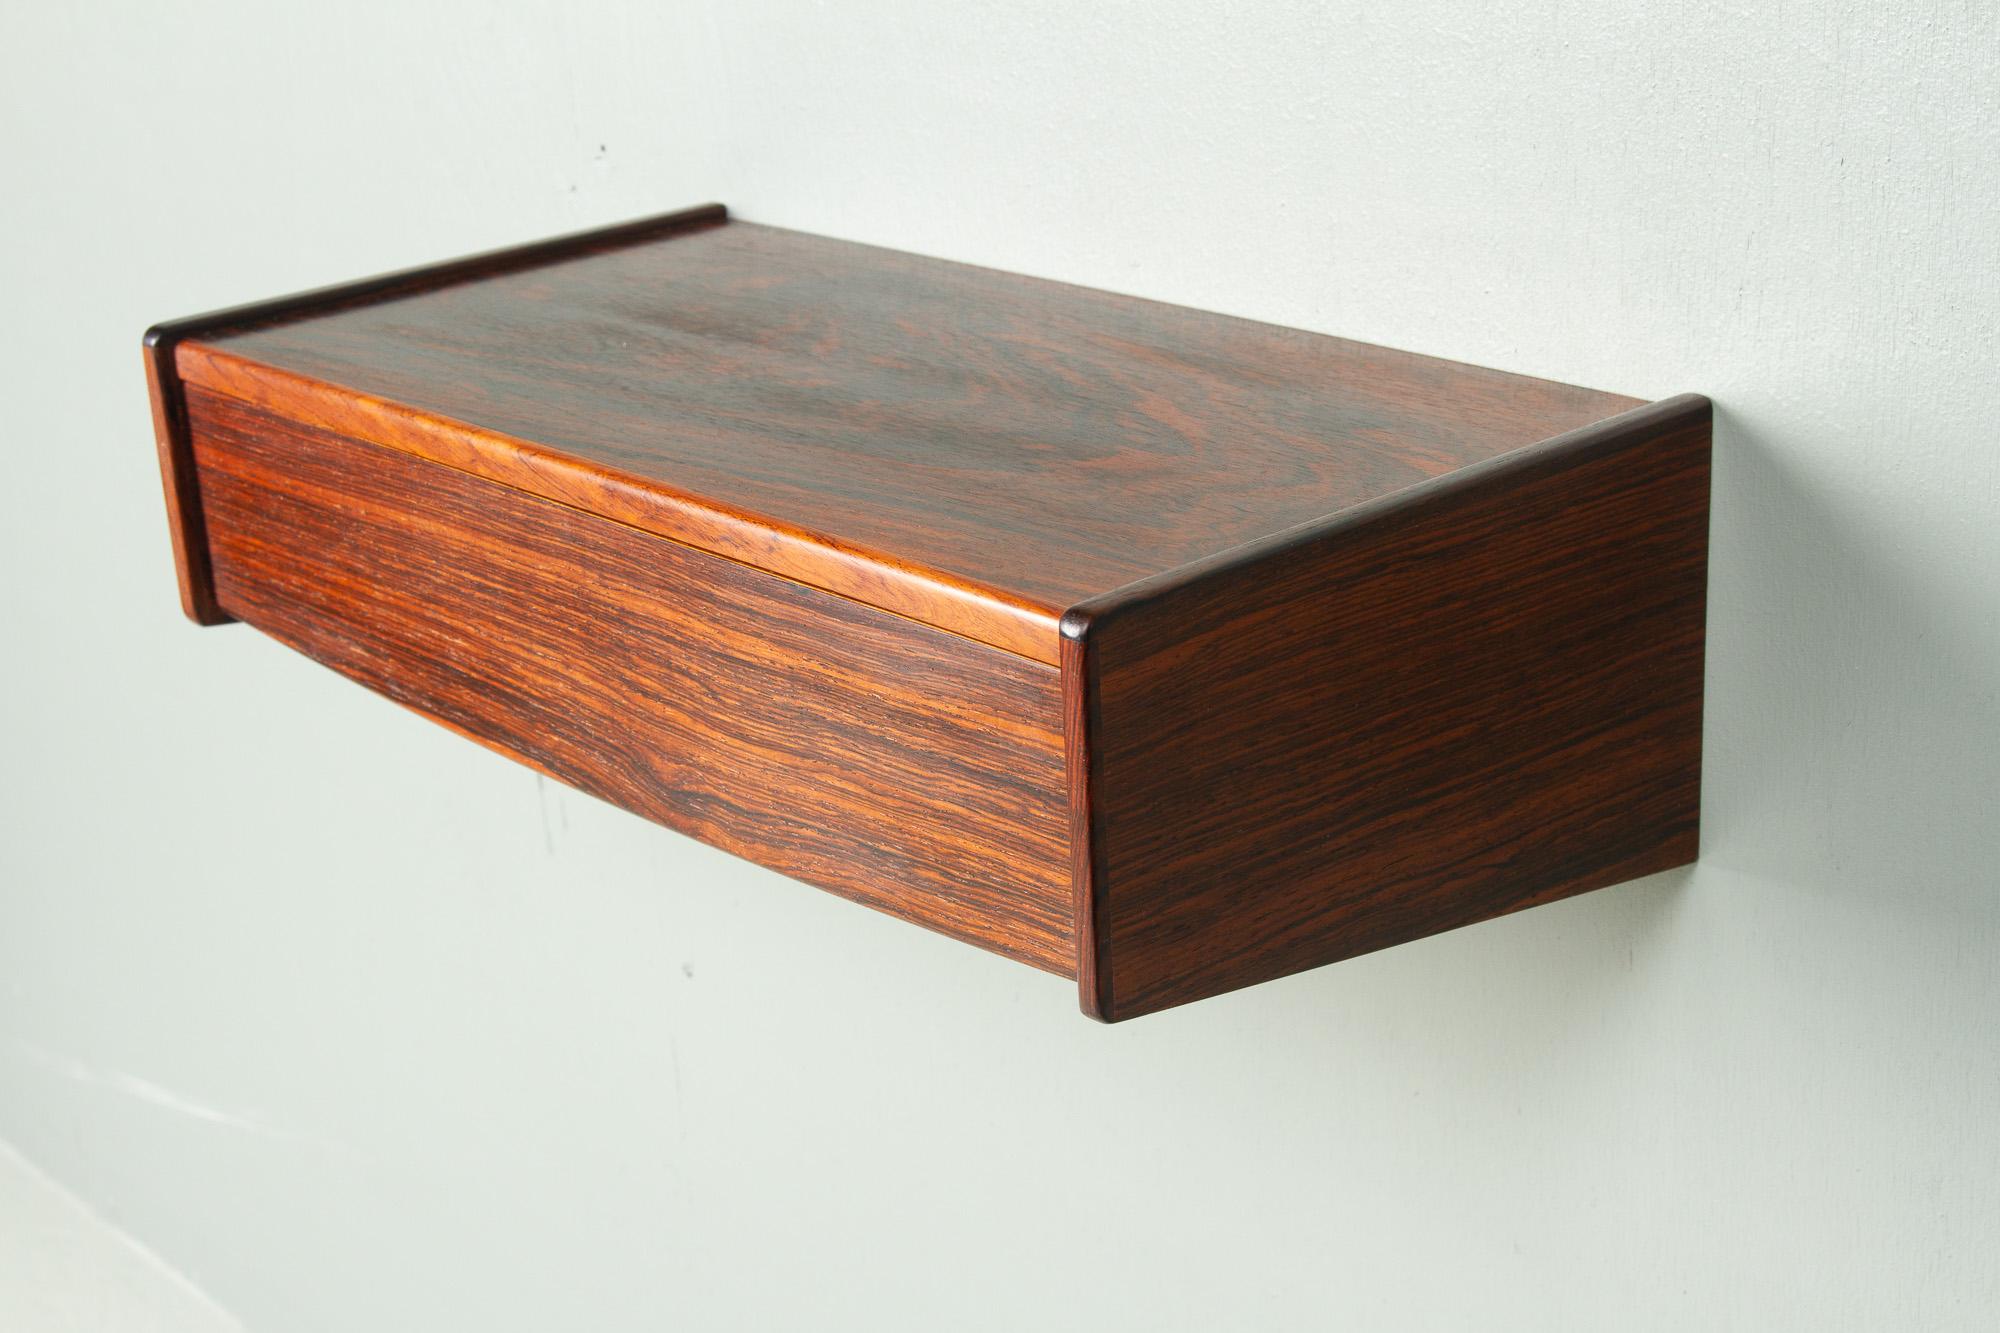 Vintage Danish Rosewood Floating Shelf, 1960s.
Mid-century modern wall mounted bedside table/nightstand/wall console made in Denmark in the 1960s. Featuring a single drawer with a smooth front. Sleek and minimalistic design.
Beautiful and